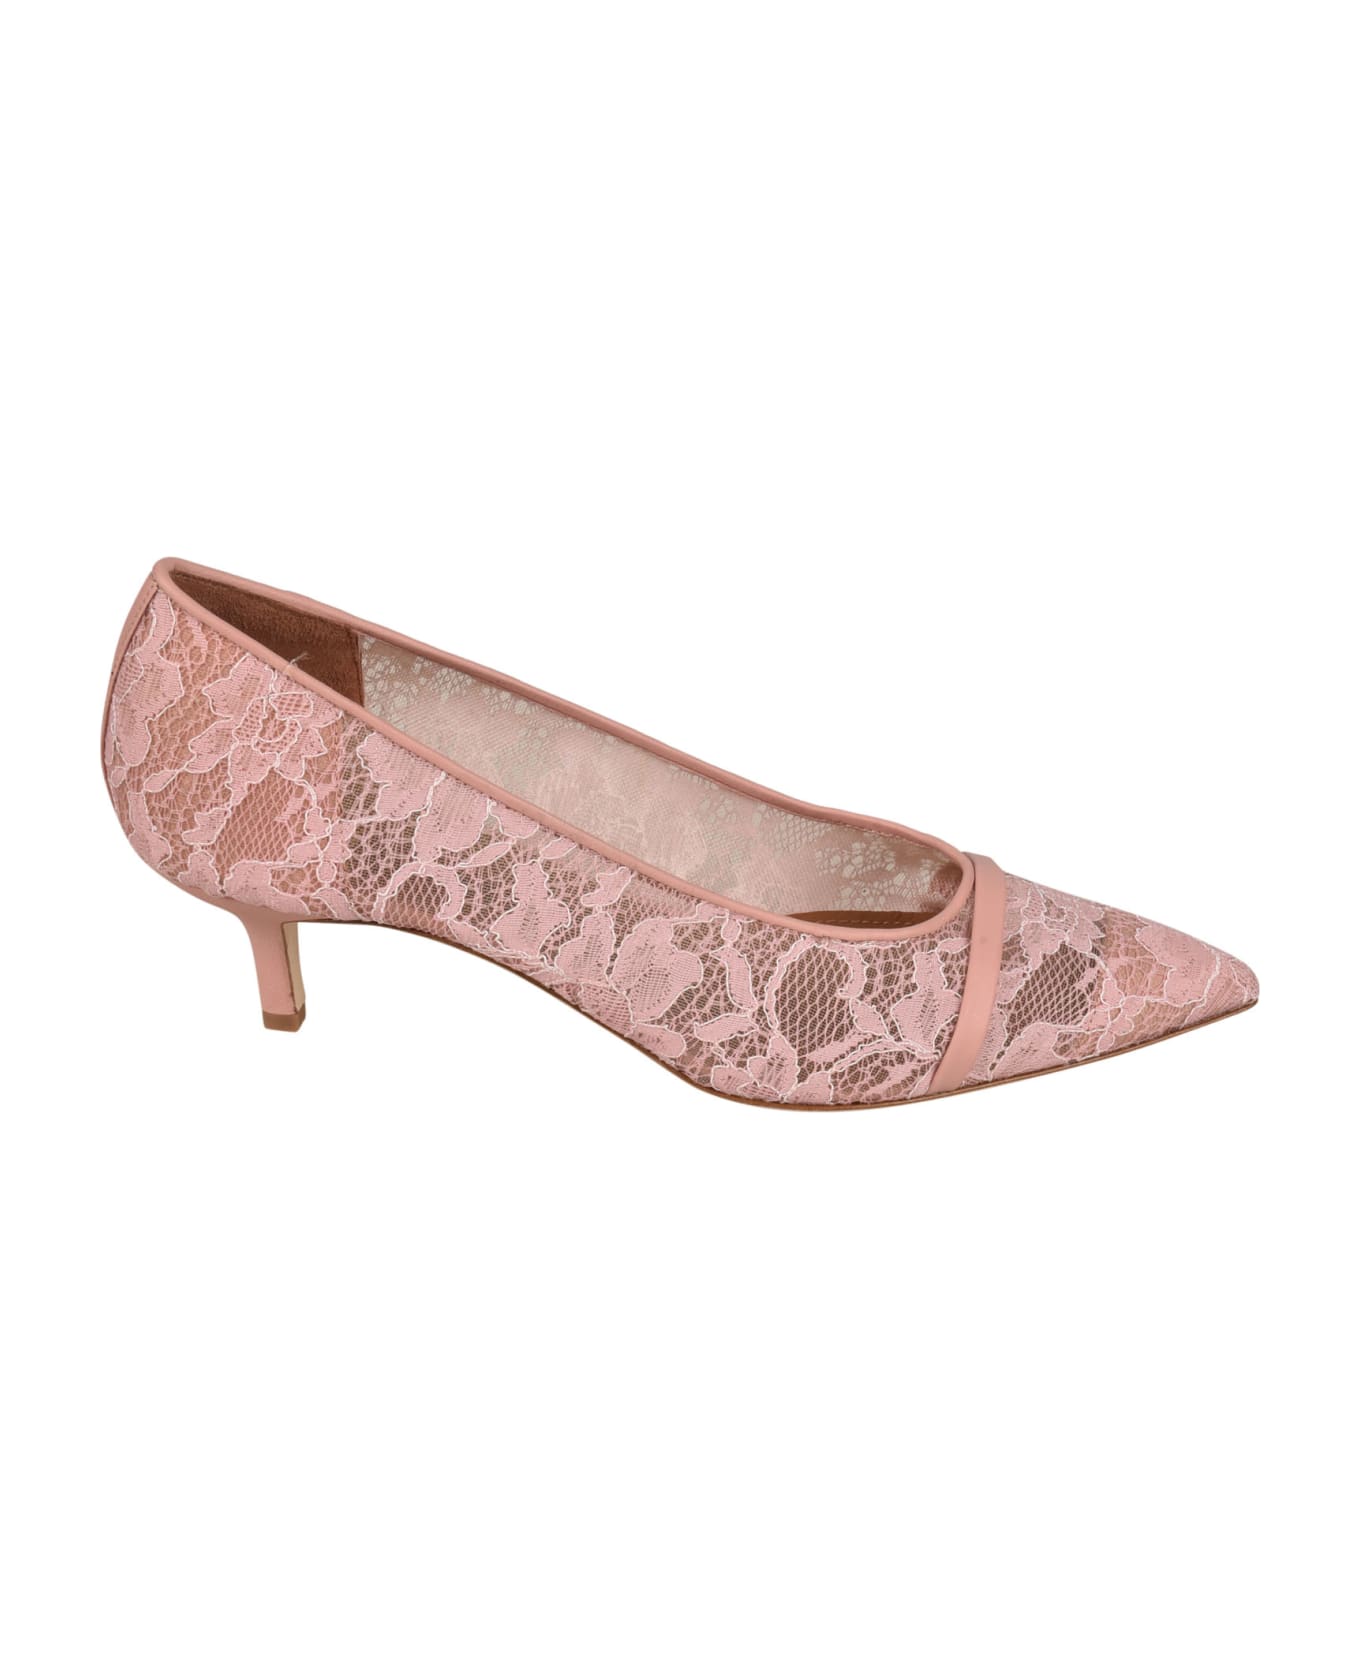 Malone Souliers Floral Lace Pumps - Pink ハイヒール